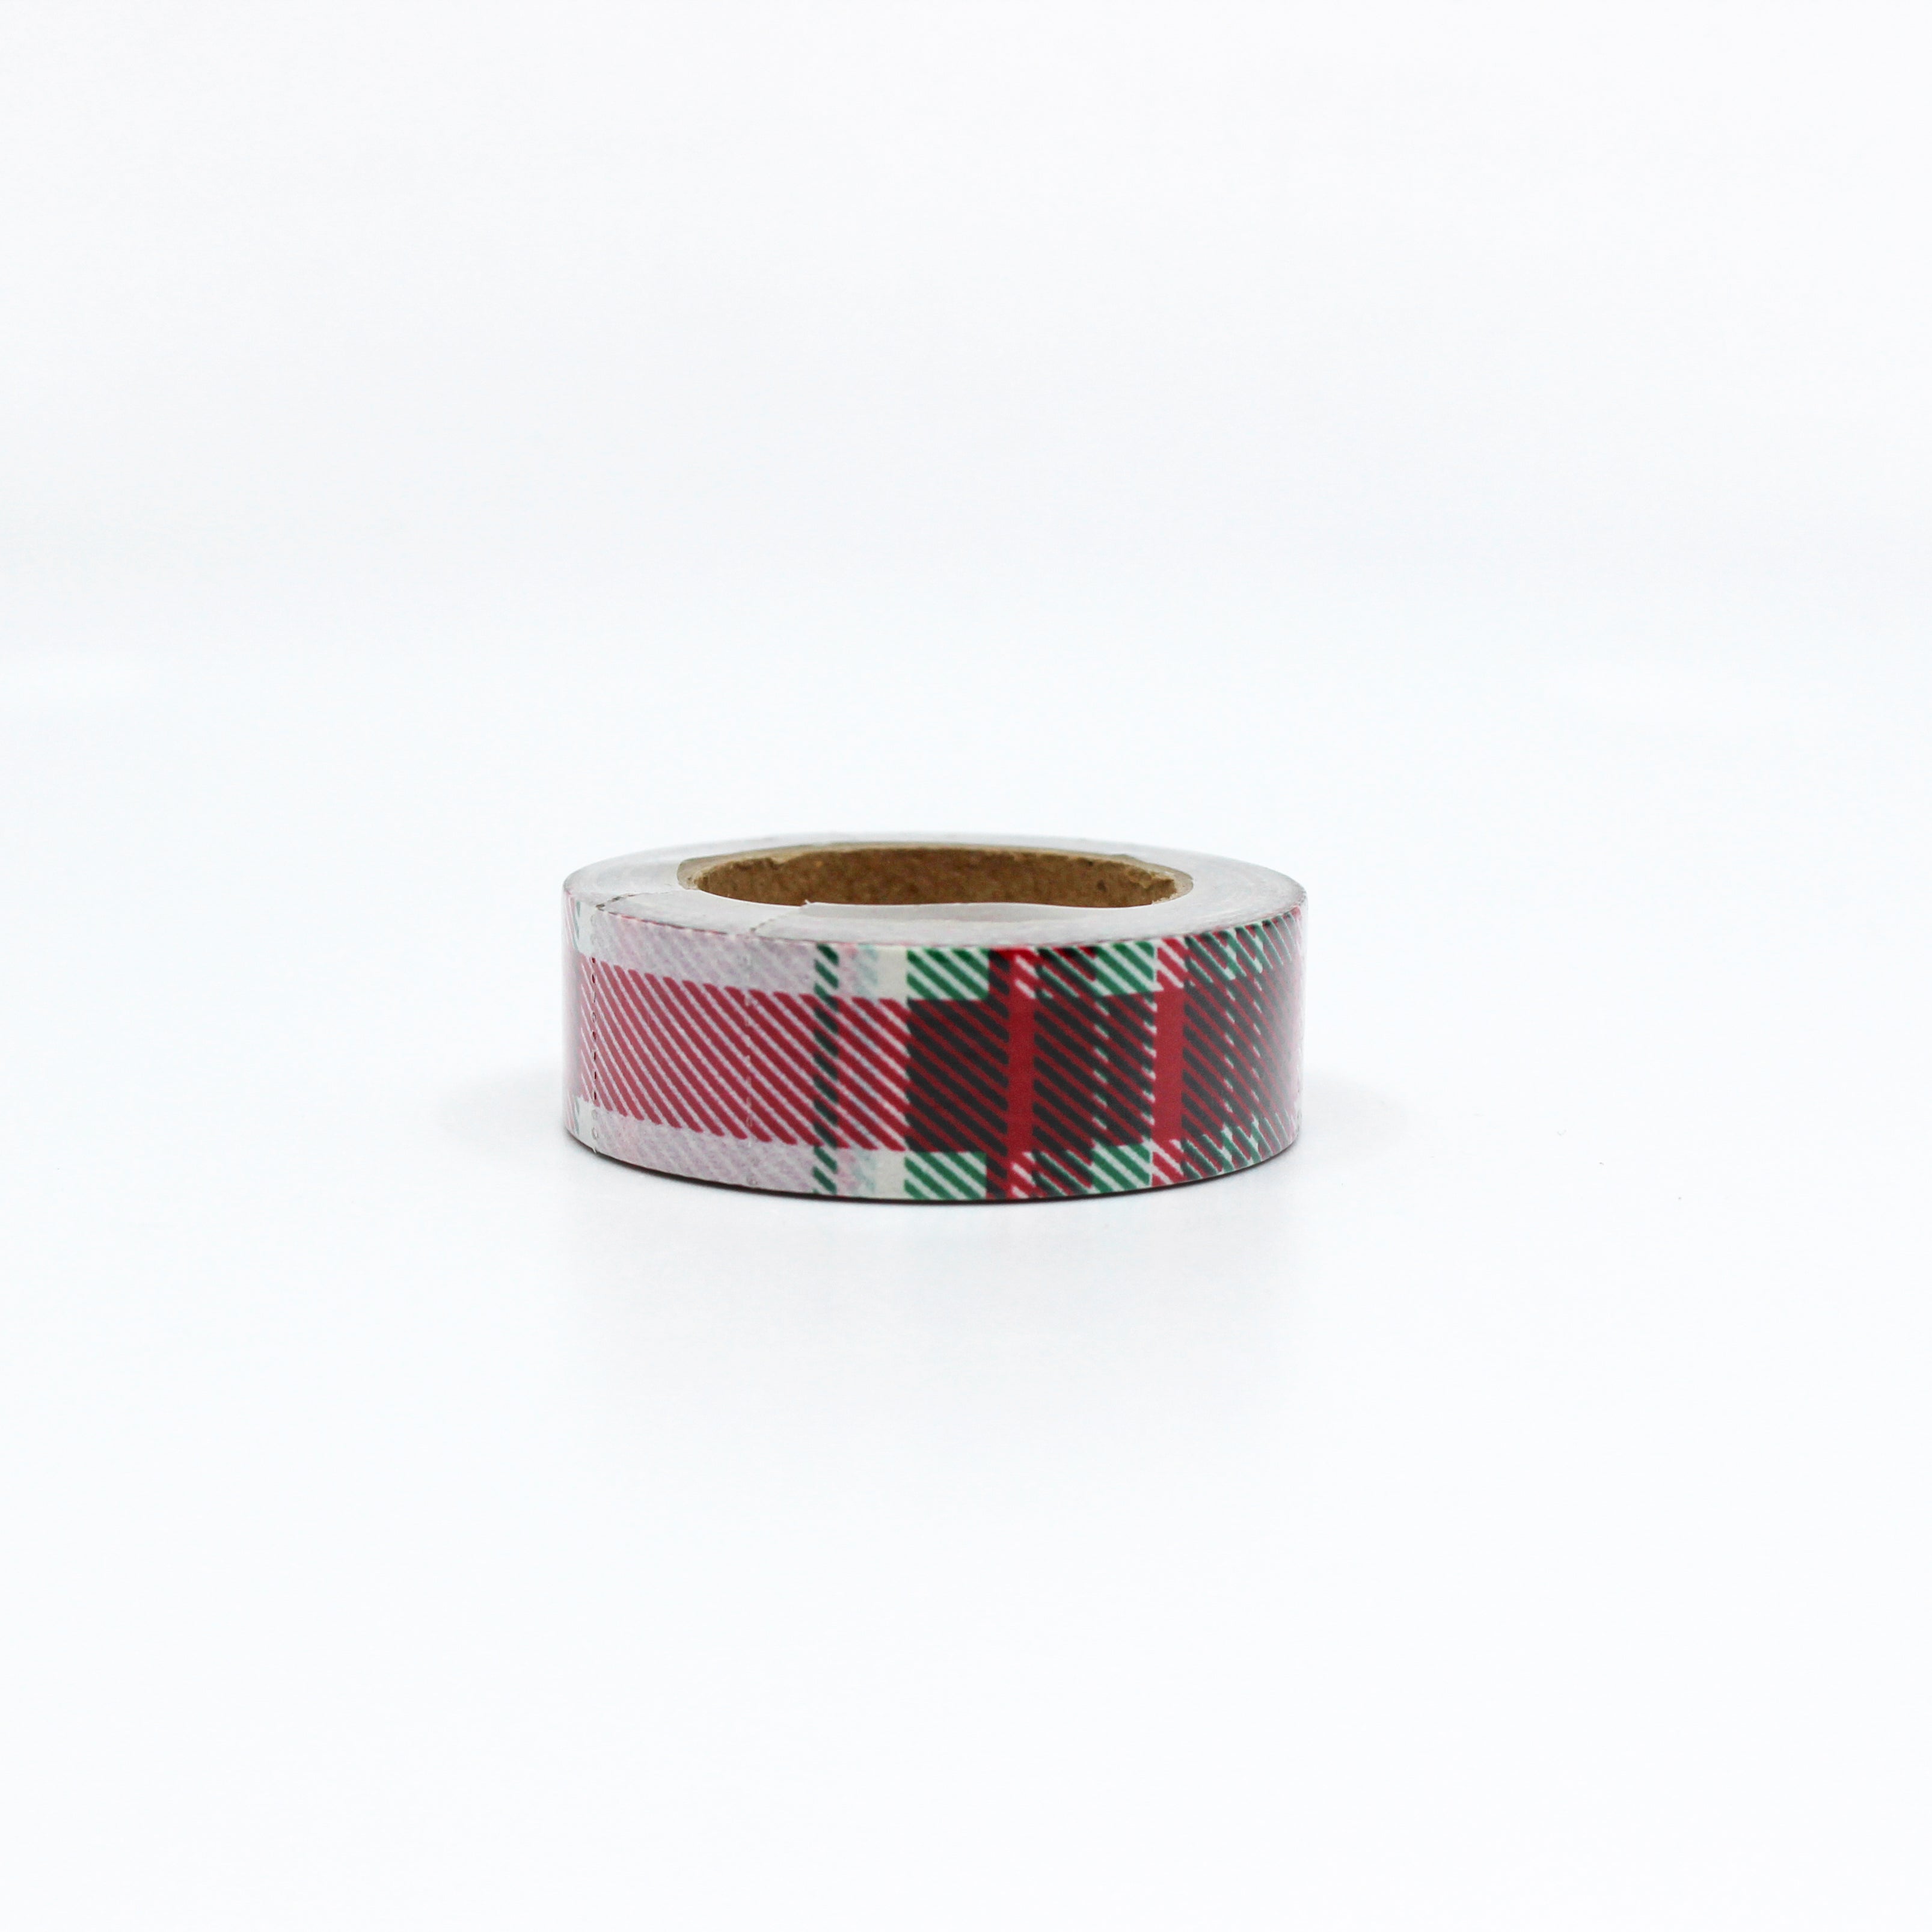 This is a holiday season plaid doves washi tape from BBB Supplies Craft Shop